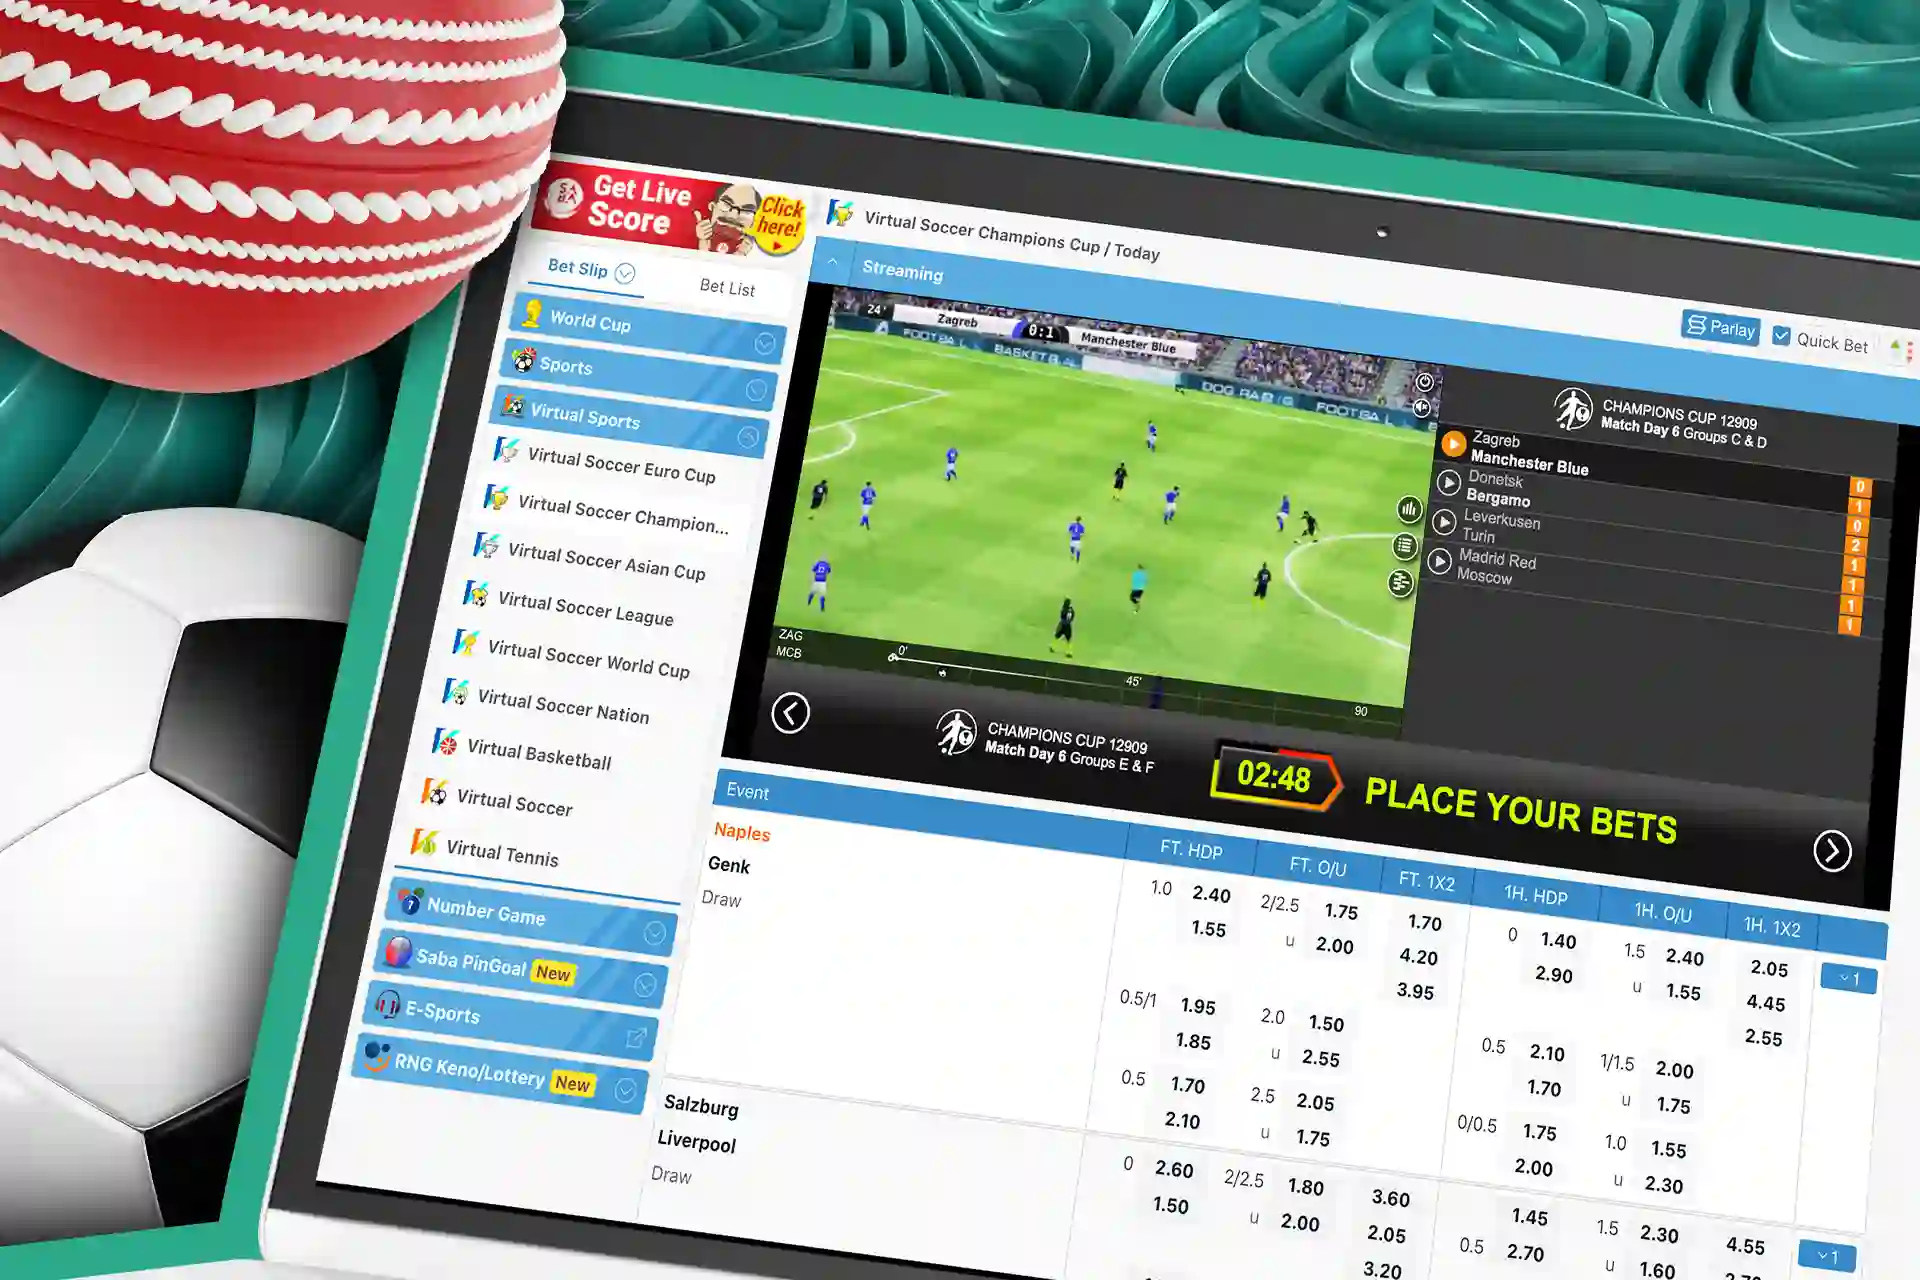 You can place bets on virtual sports as you bet on real sports.